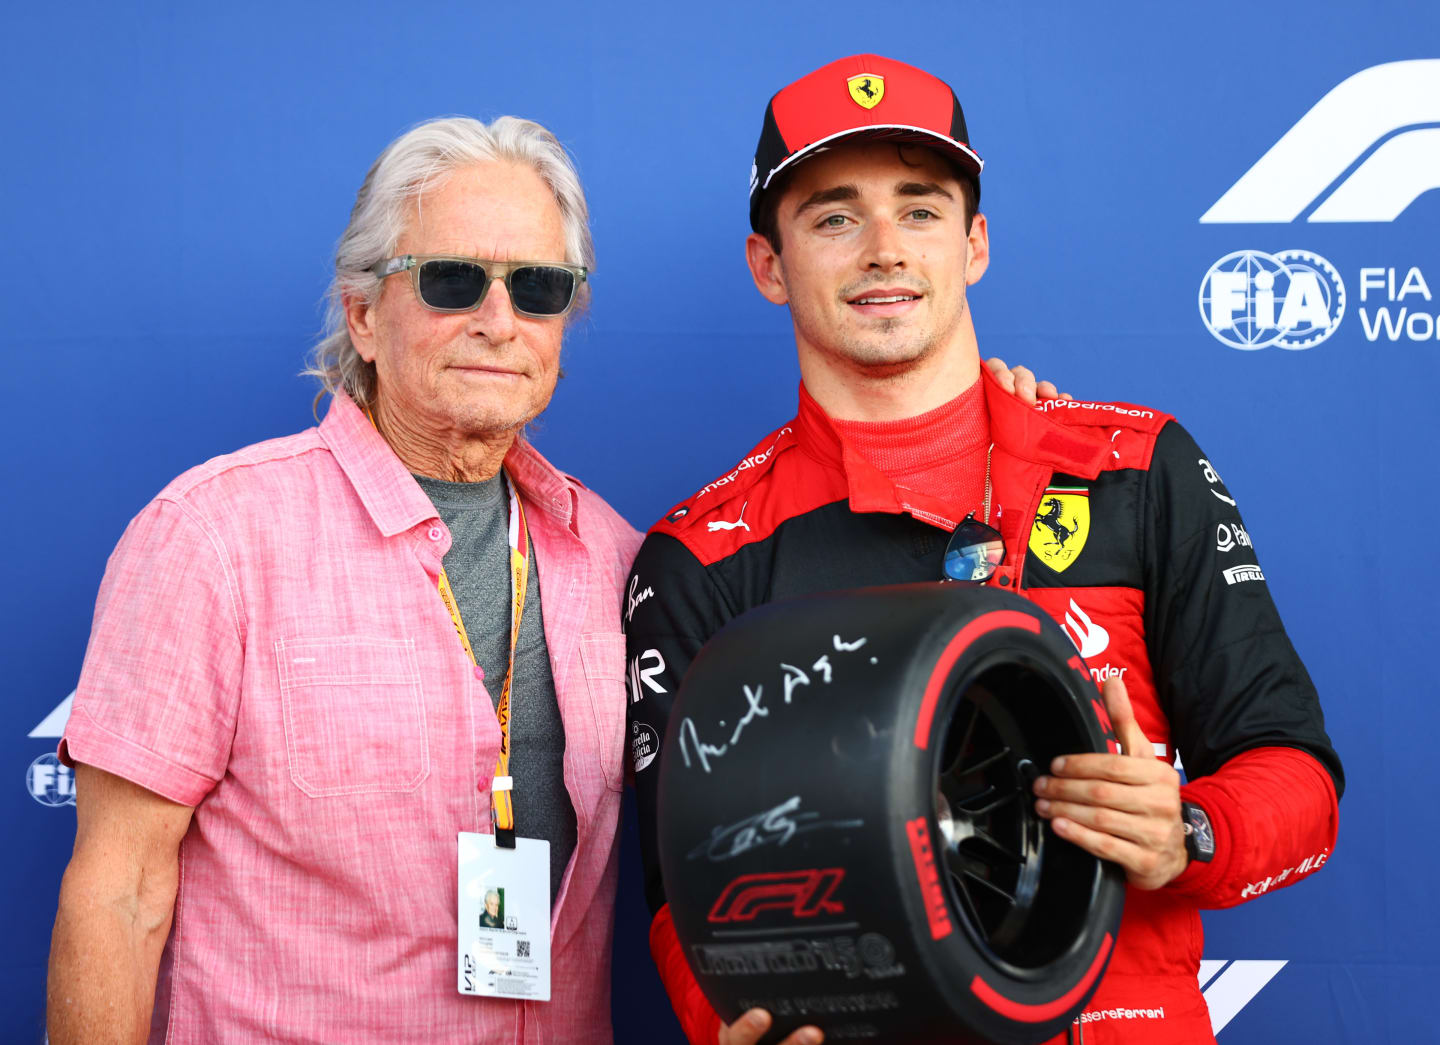 MIAMI, FLORIDA - MAY 07: Pole position qualifier Charles Leclerc of Monaco and Ferrari is presented